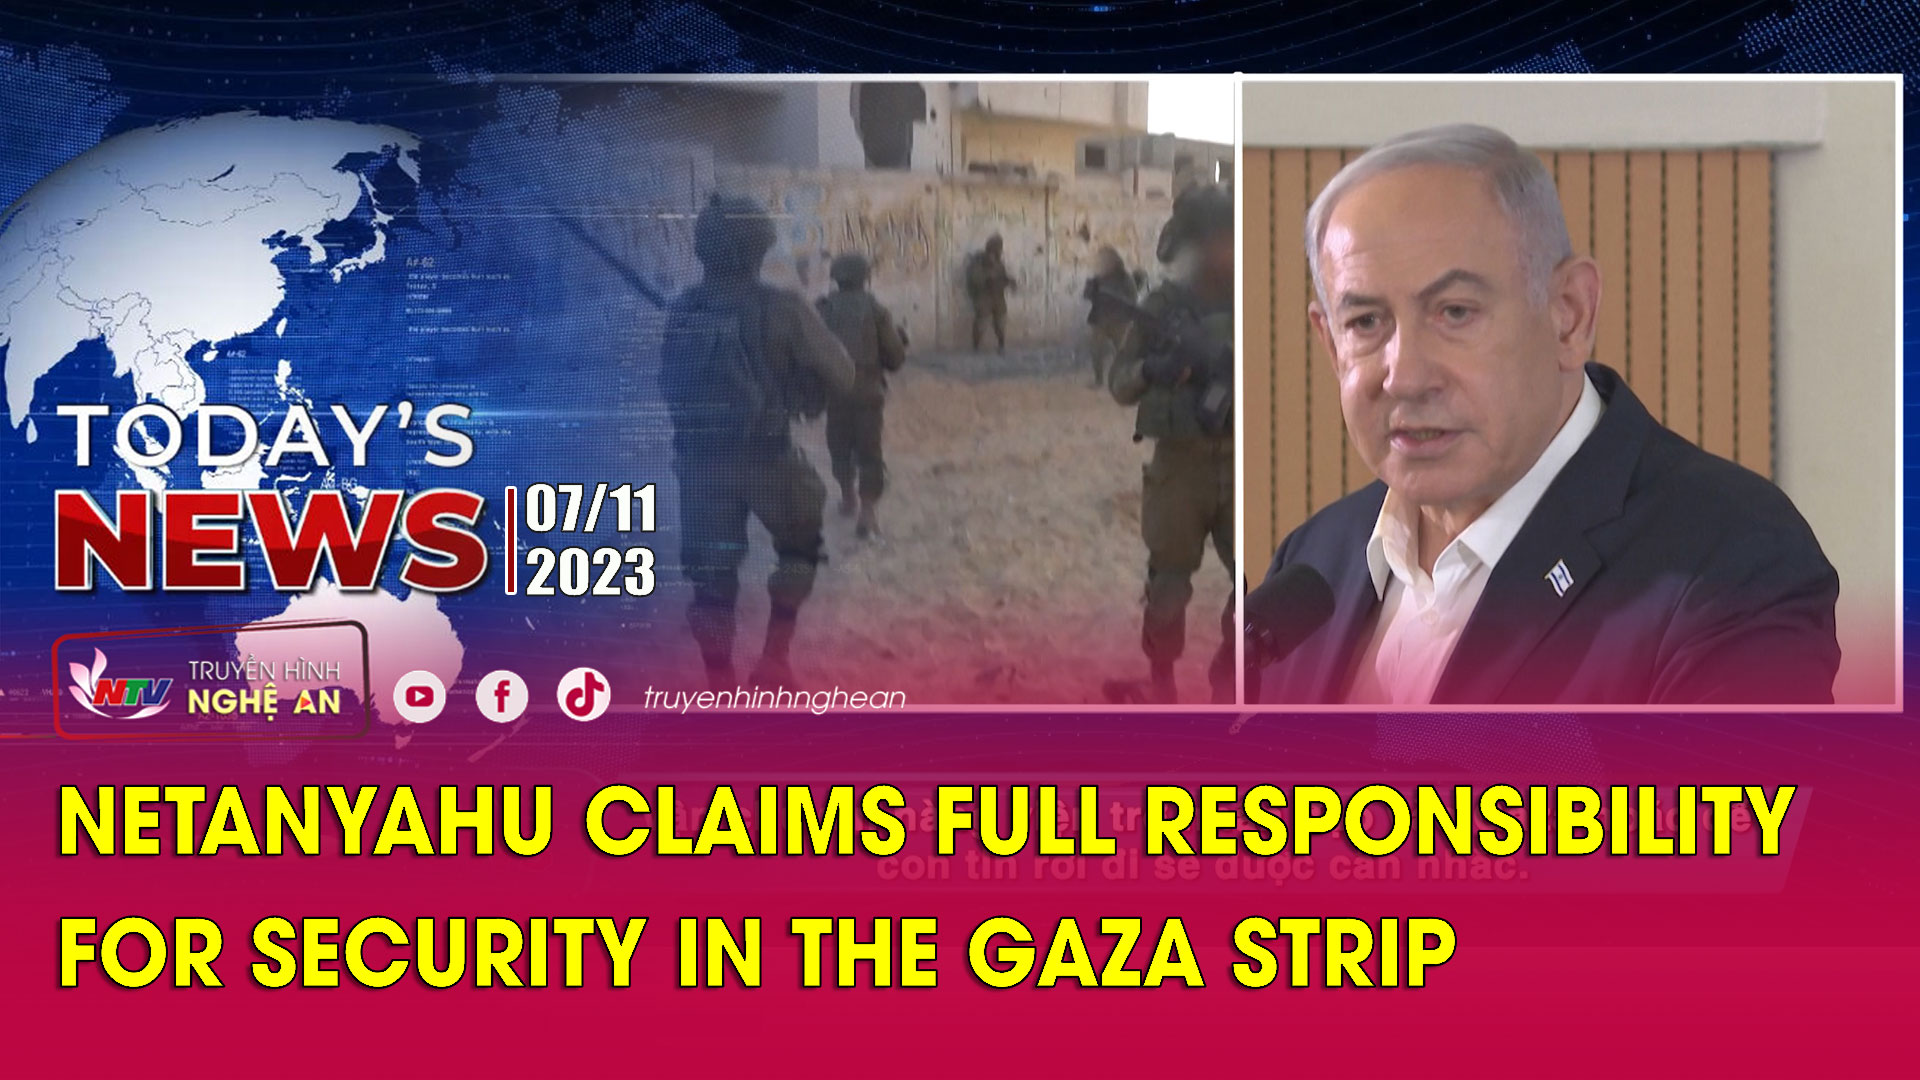 Today's News - 7/11/2023: Netanyahu claims full responsibility for security in the Gaza Strip